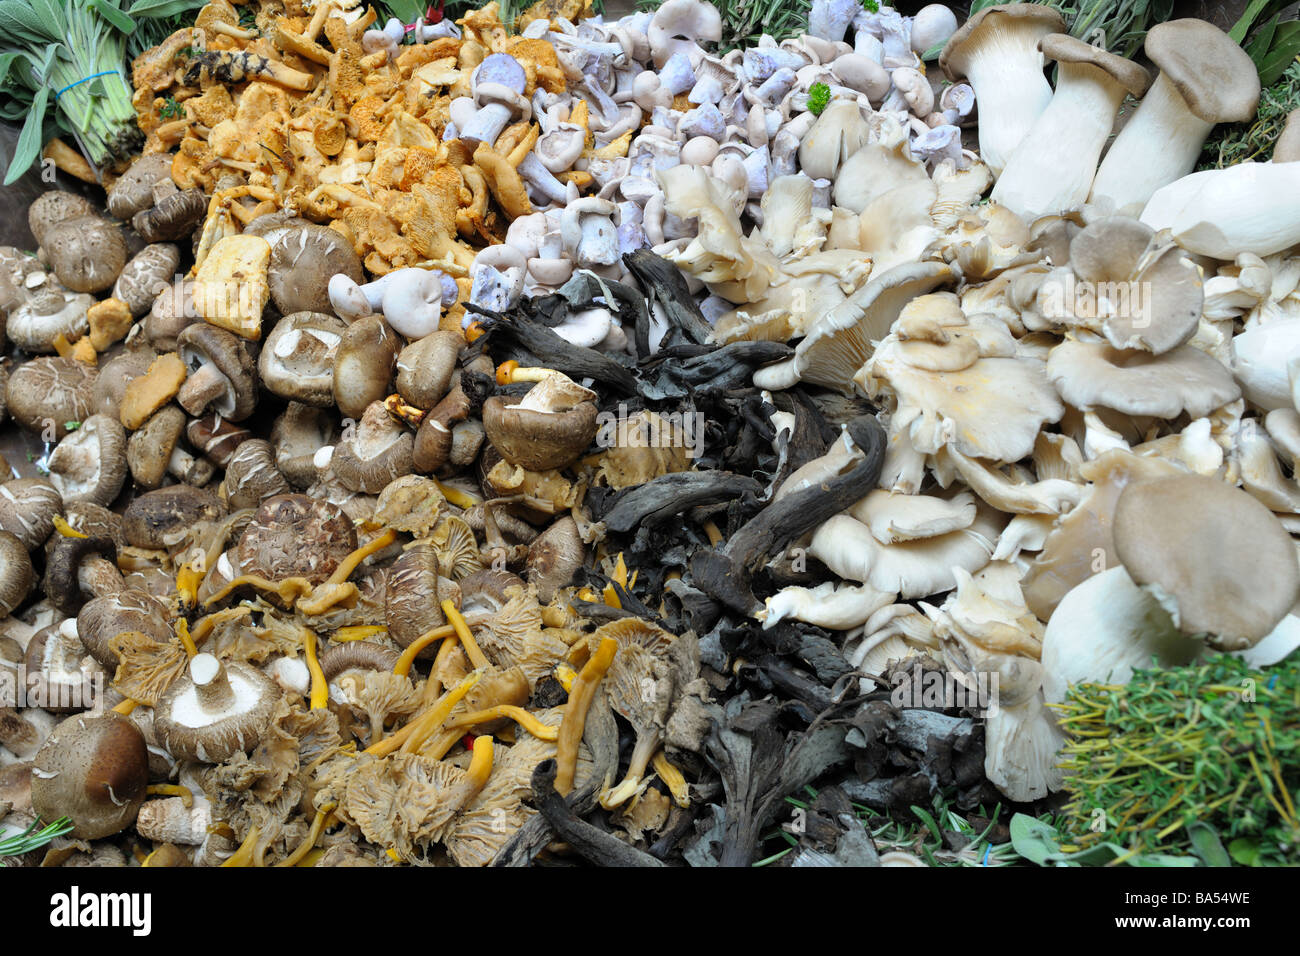 Arrangement of assorted funghi on a market stall Stock Photo